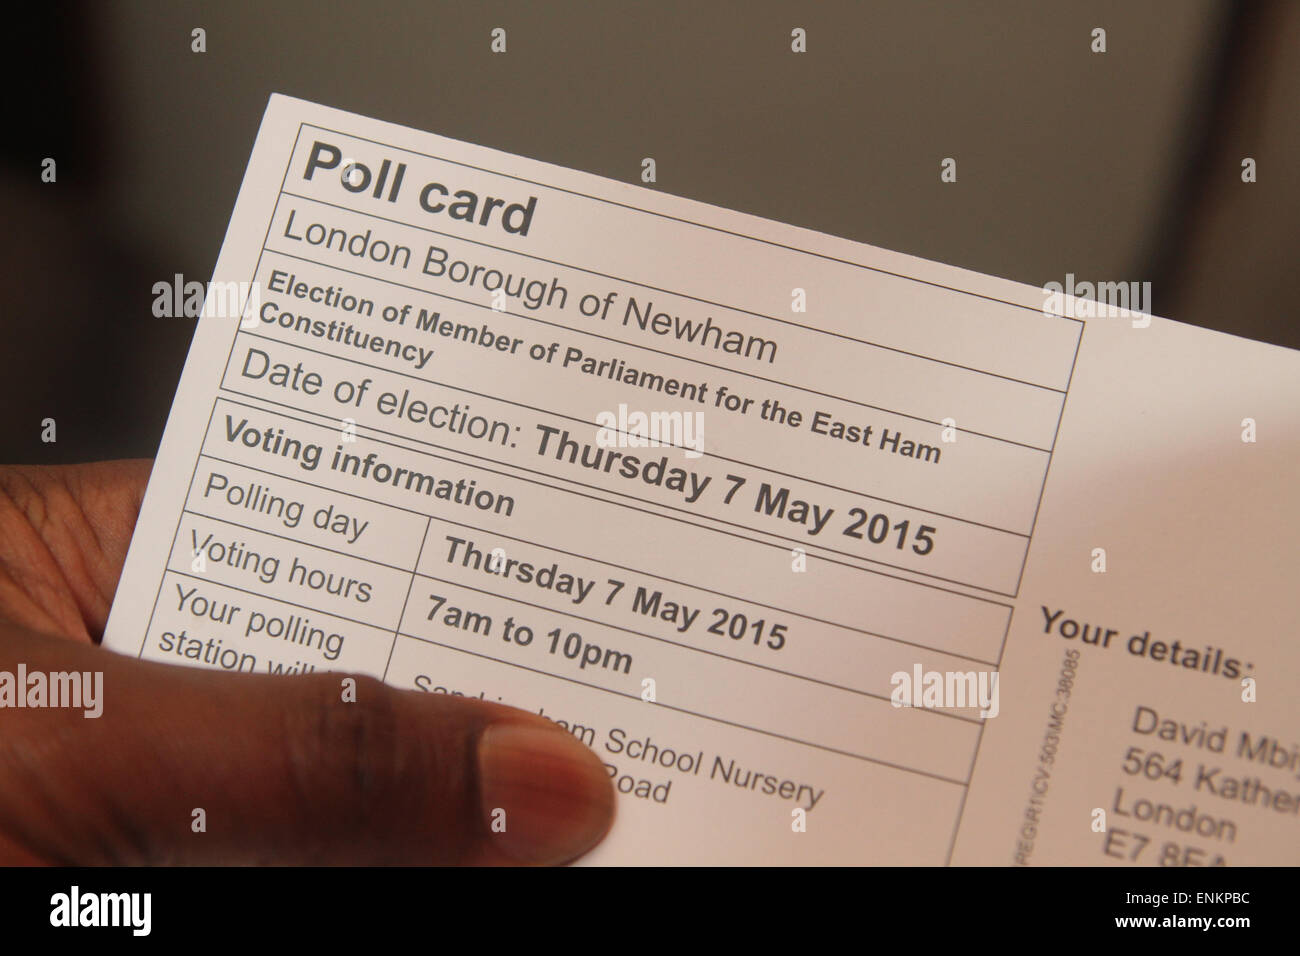 London, UK. 6th May, 2015. A London borough of Newham voter hold a Polling card ahead of the Thursday 7 May UK elections. Britain's two-party system appears under severe threat, with the distinct prospect that between them Labour and the Conservatives will struggle to gain two-thirds of the votes cast. Compare that with their near 90% vote share just 50 years ago. Credit:  david mbiyu/Alamy Live News Stock Photo